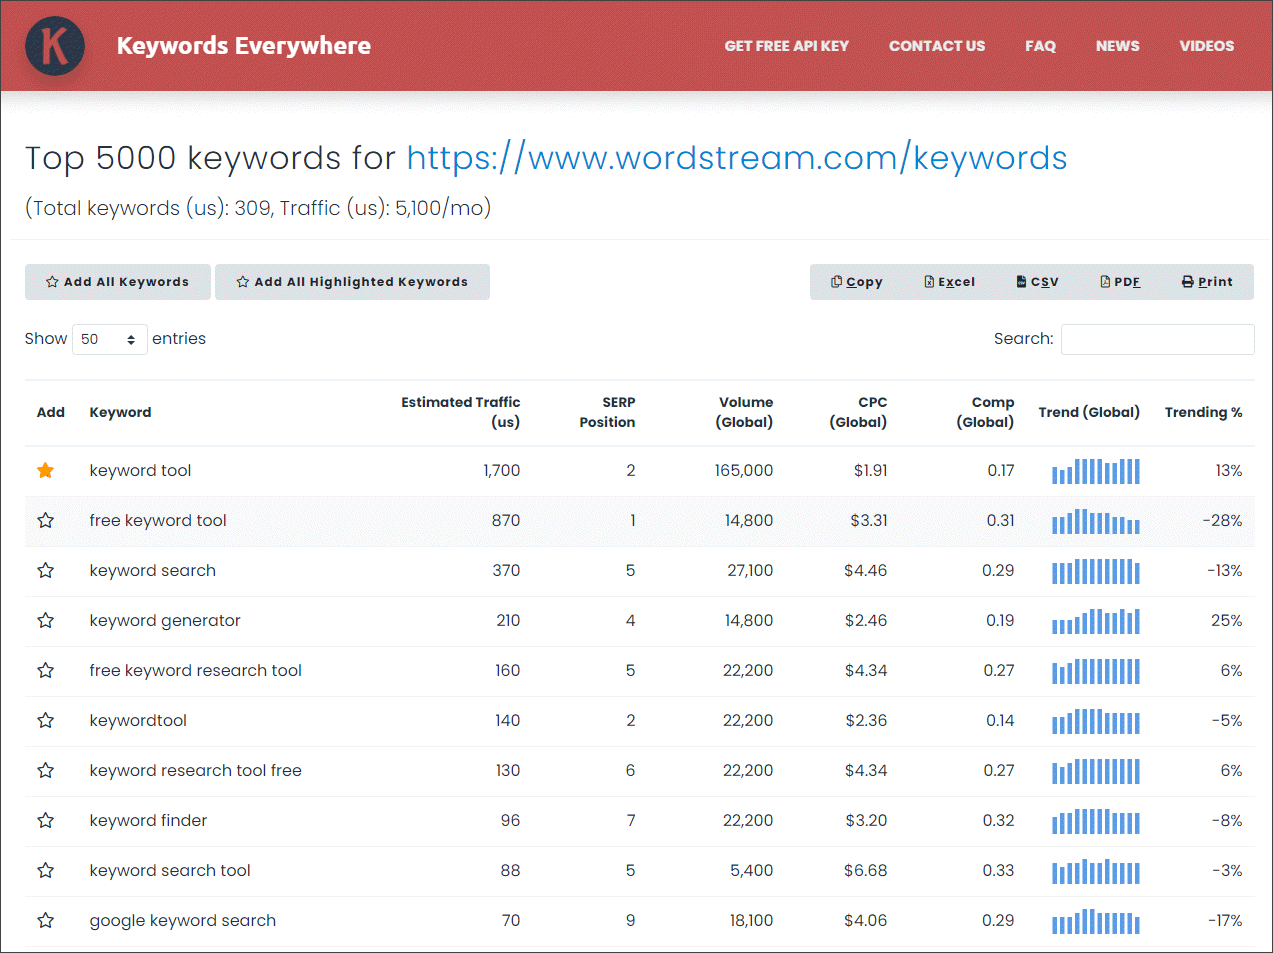 List of top 5000 keywords that the URL ranks for